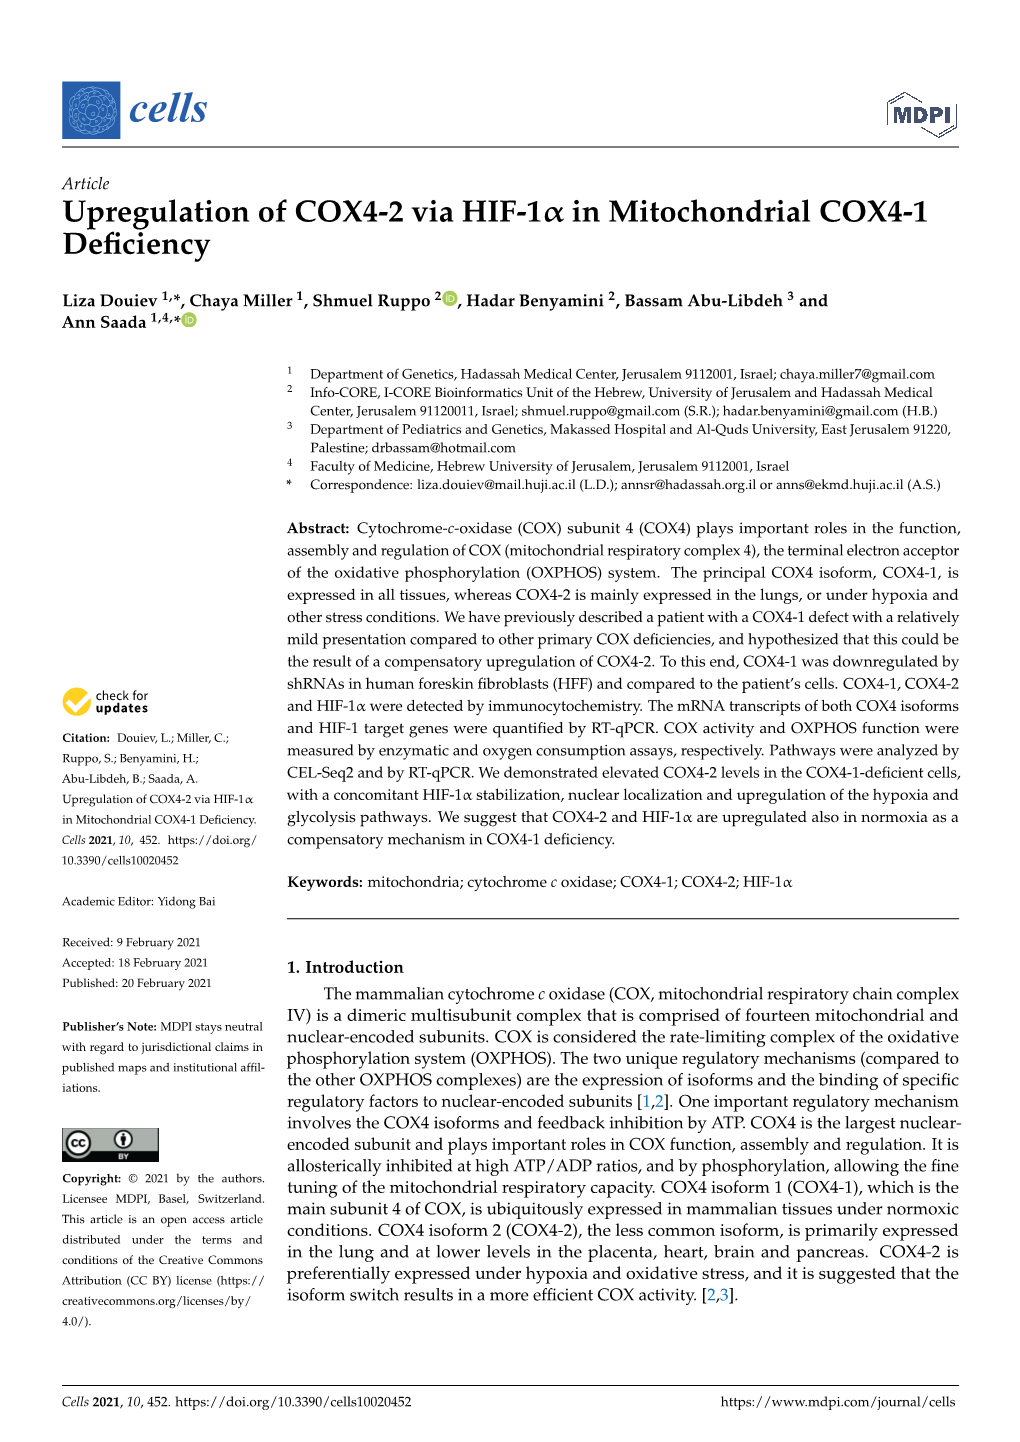 Upregulation of COX4-2 Via HIF-1 in Mitochondrial COX4-1 Deficiency